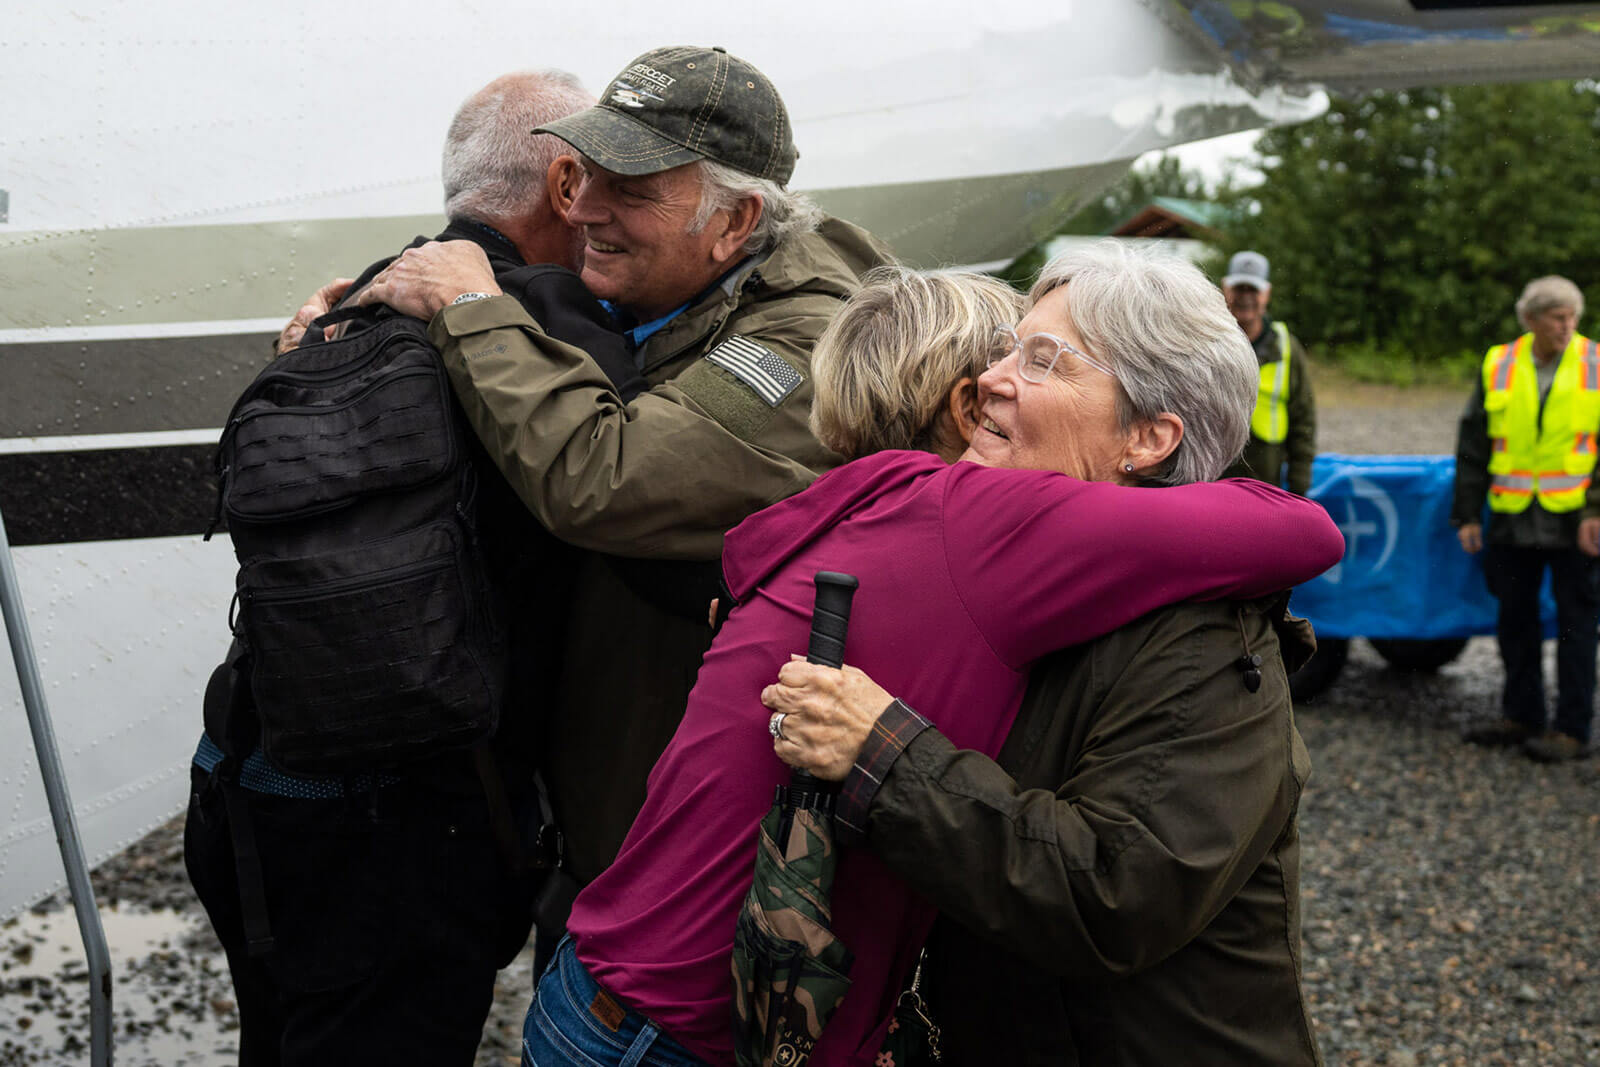 Samaritan's Purse President Franklin Graham and his wife, Jane, met couples as they arrived.